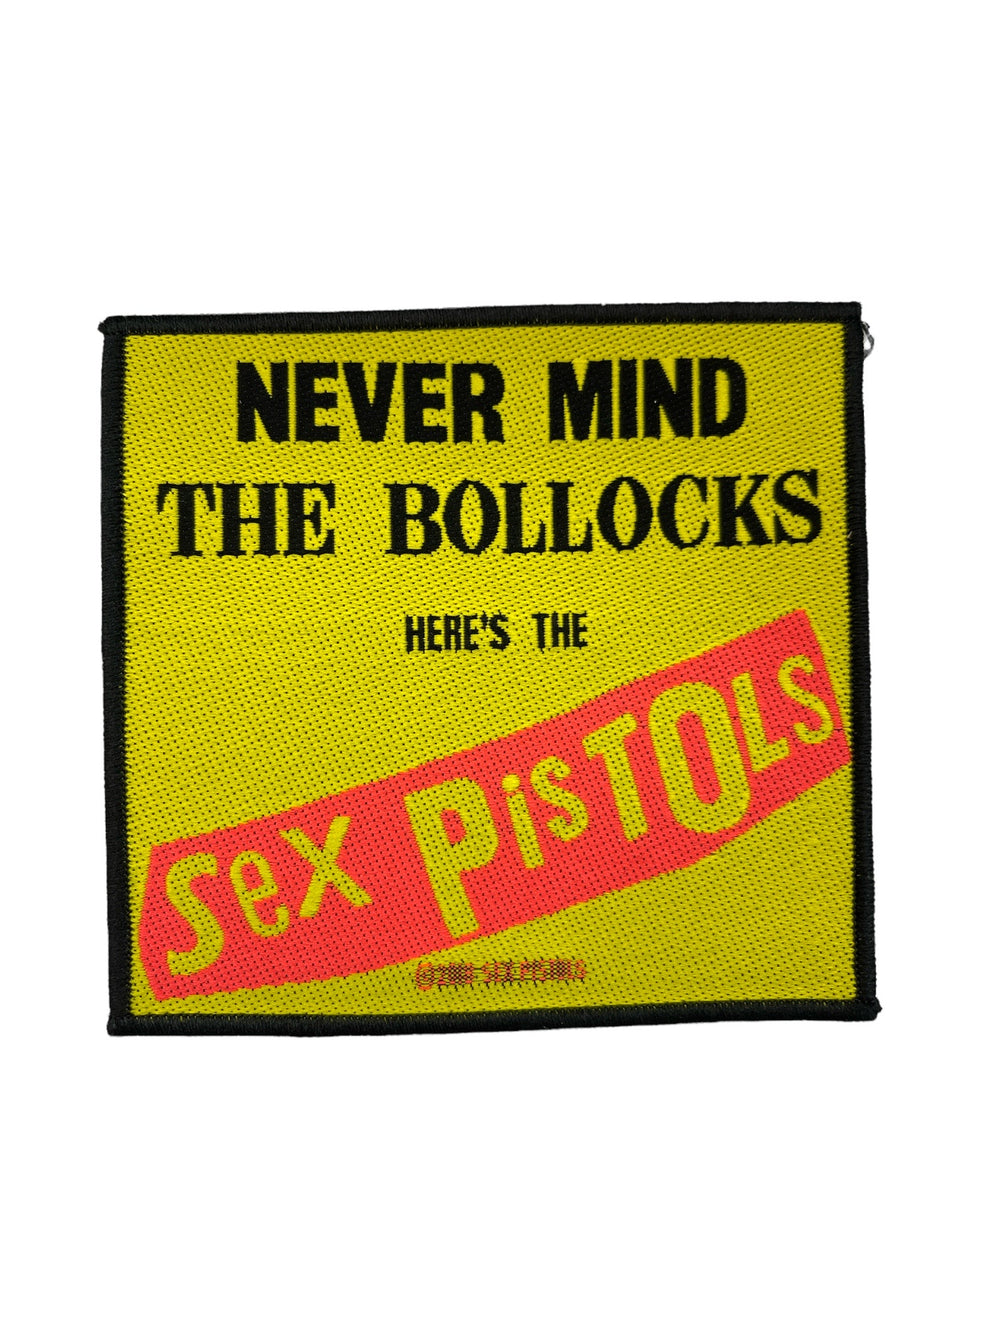 Sex Pistols Nevermind Yellow Official Woven Patch Brand New